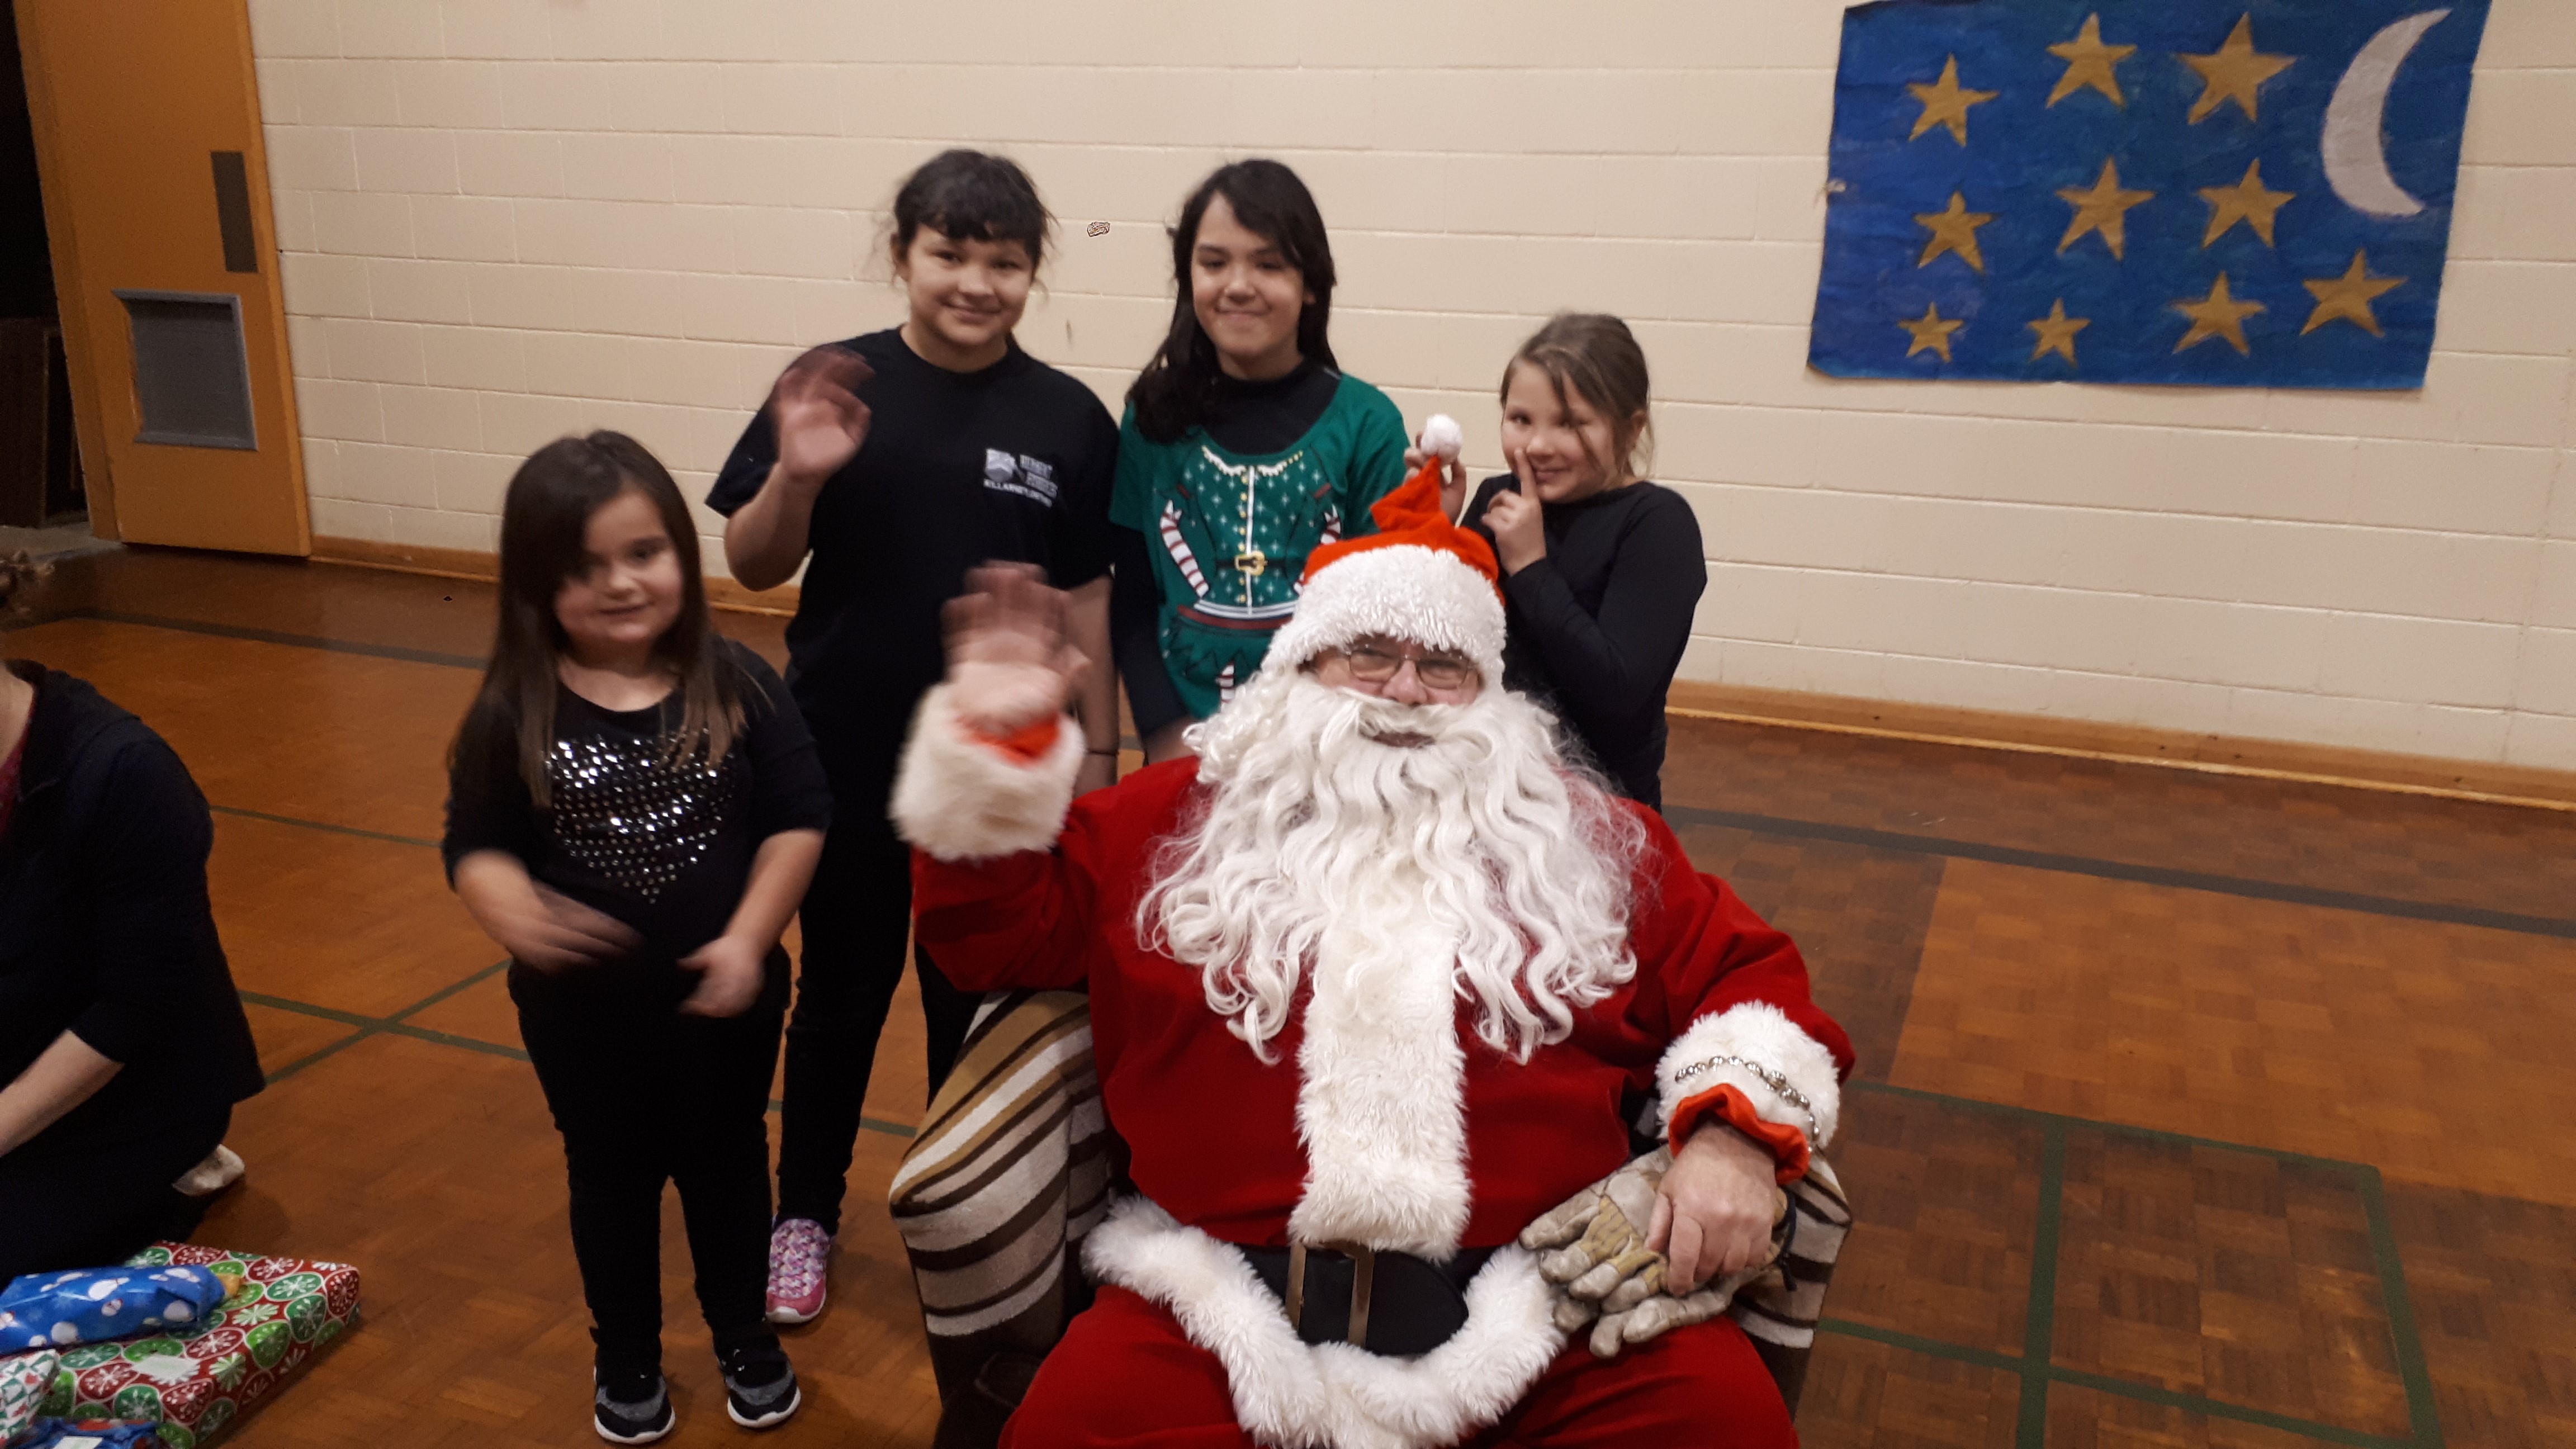 Students Jessica Pawson, Abby Beaucage, Channel Burant-Roque and Emily Beaucage pose with Santa